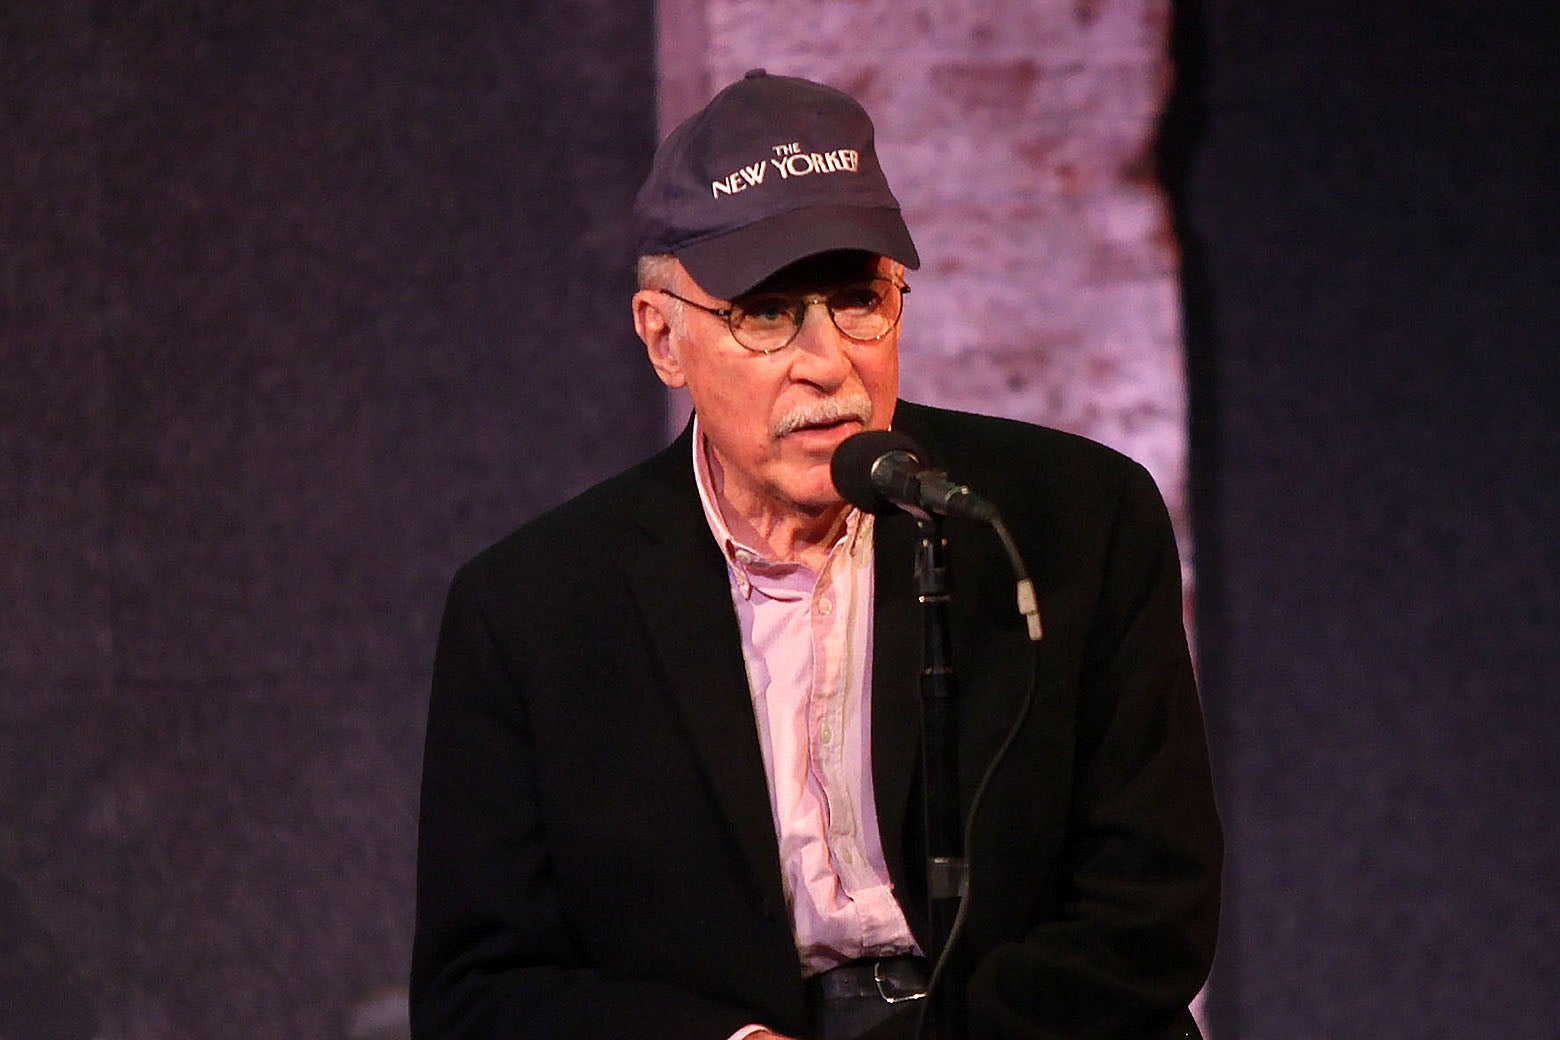 Roger Angell speaking to a crowd with a New Yorker cap on.